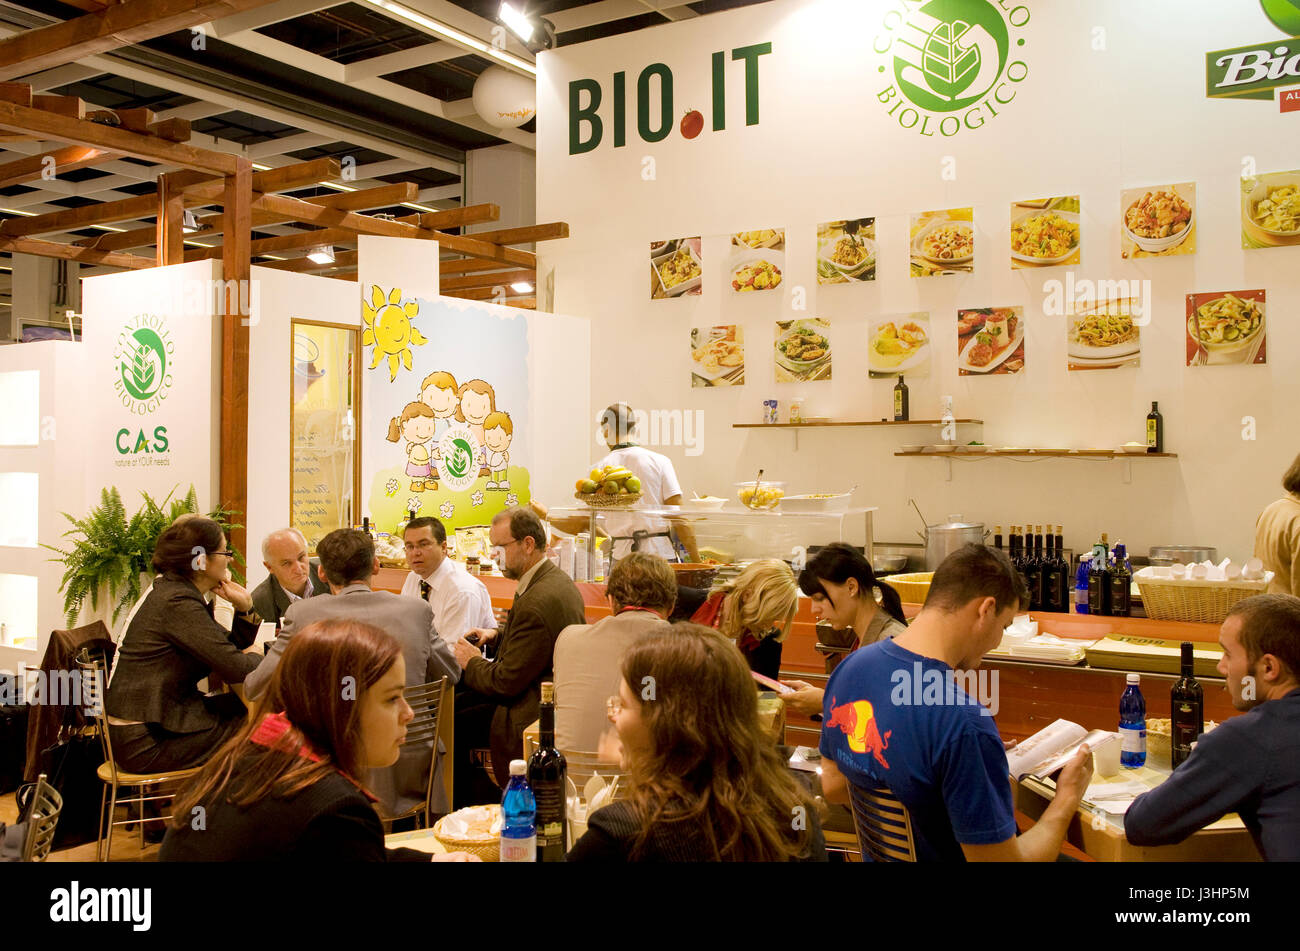 Germany, Cologne, the ANUGA food and beverages trade fair at the exhibition center in the district Deutz, stall of the company Bioitalia. Stock Photo